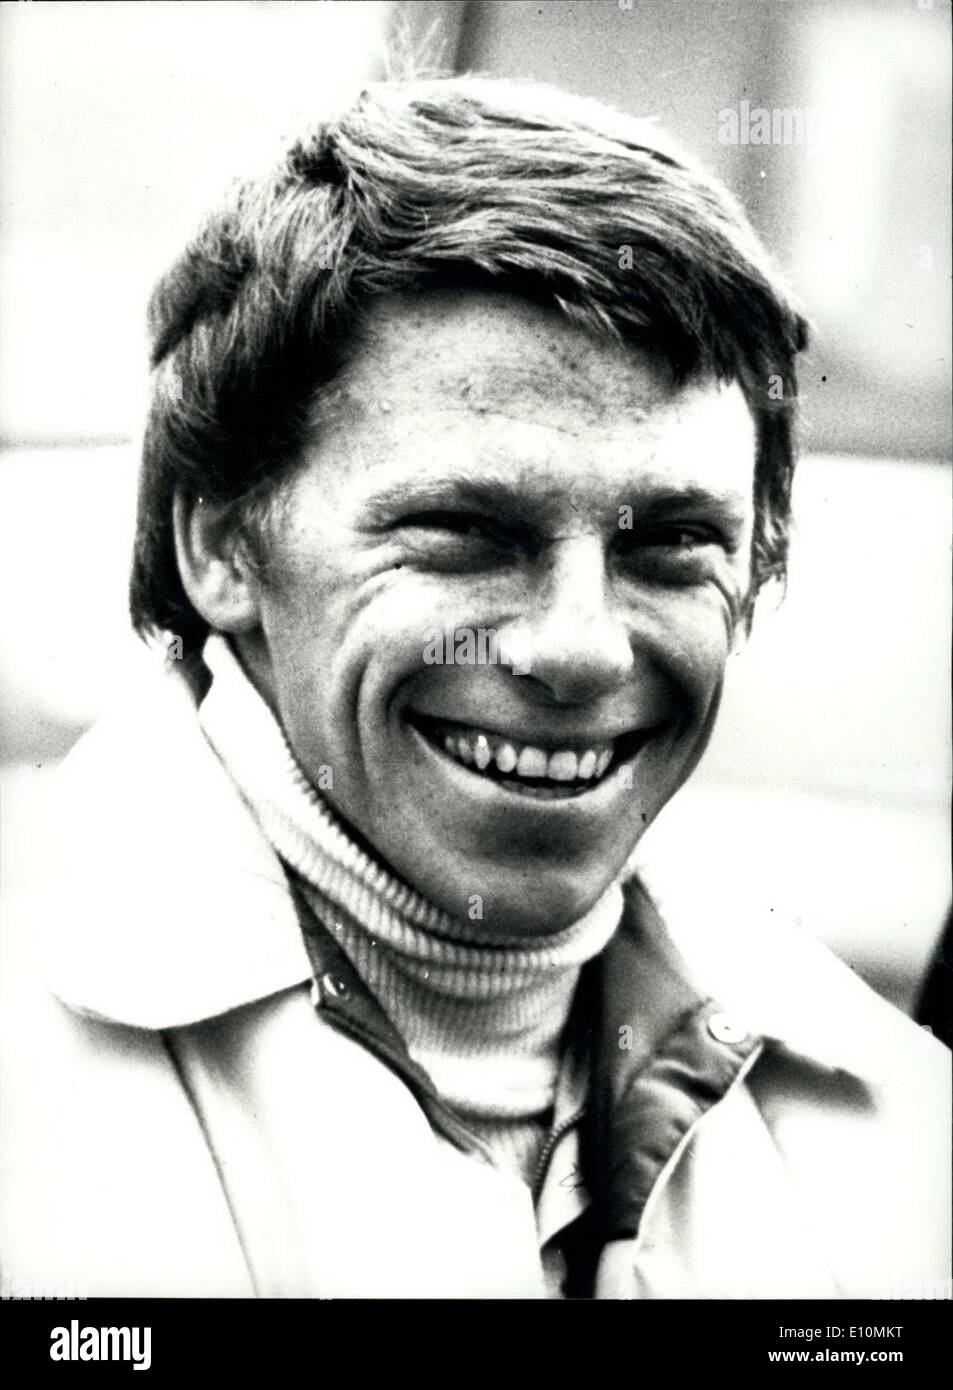 Jul. 30, 1973 - British Racing Driver Killed In Dutch Grand Prix.: 25-year old British racing driver Roger Williamson died yesterday when he was trapped in his blazing car after spinning off the track and crashing at 120 mph, during the Dutch Grand Prix on Zandvoort circuit. Photo shows Roger Williamson, the young British racing driver, who was killed during the Dutch Grand Prix yesterday. Stock Photo